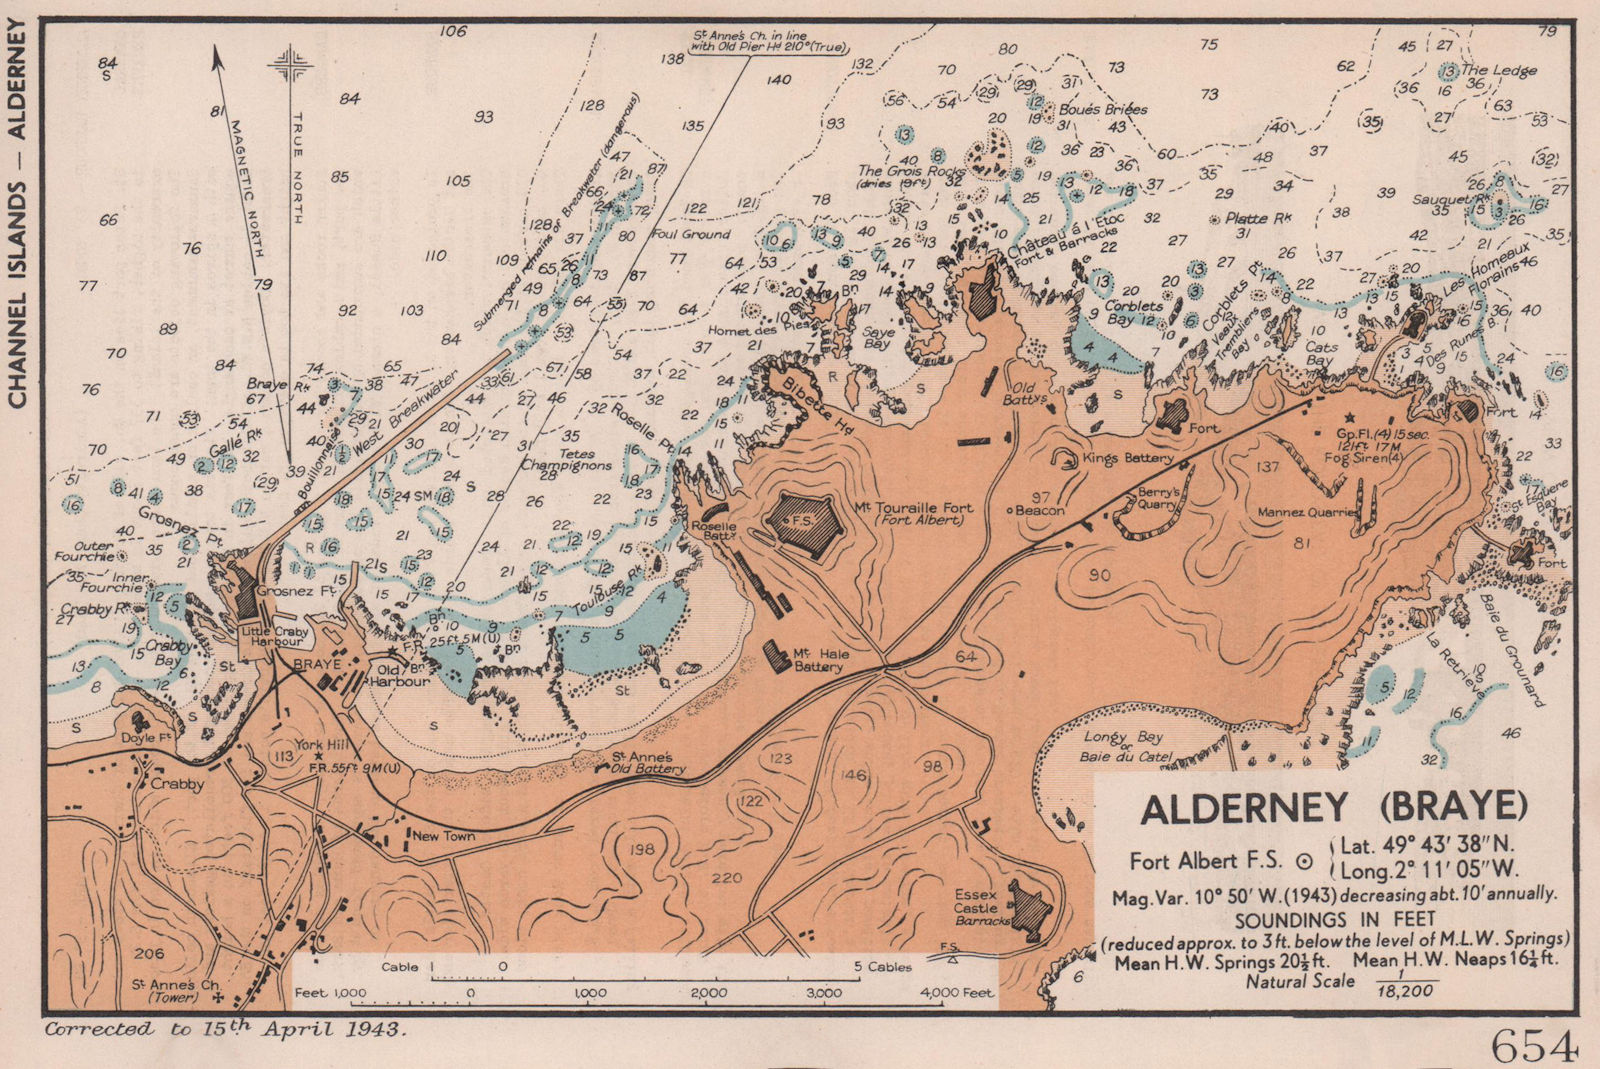 Braye, Alderney sea coast chart D-Day planning map. ADMIRALTY 1943 old